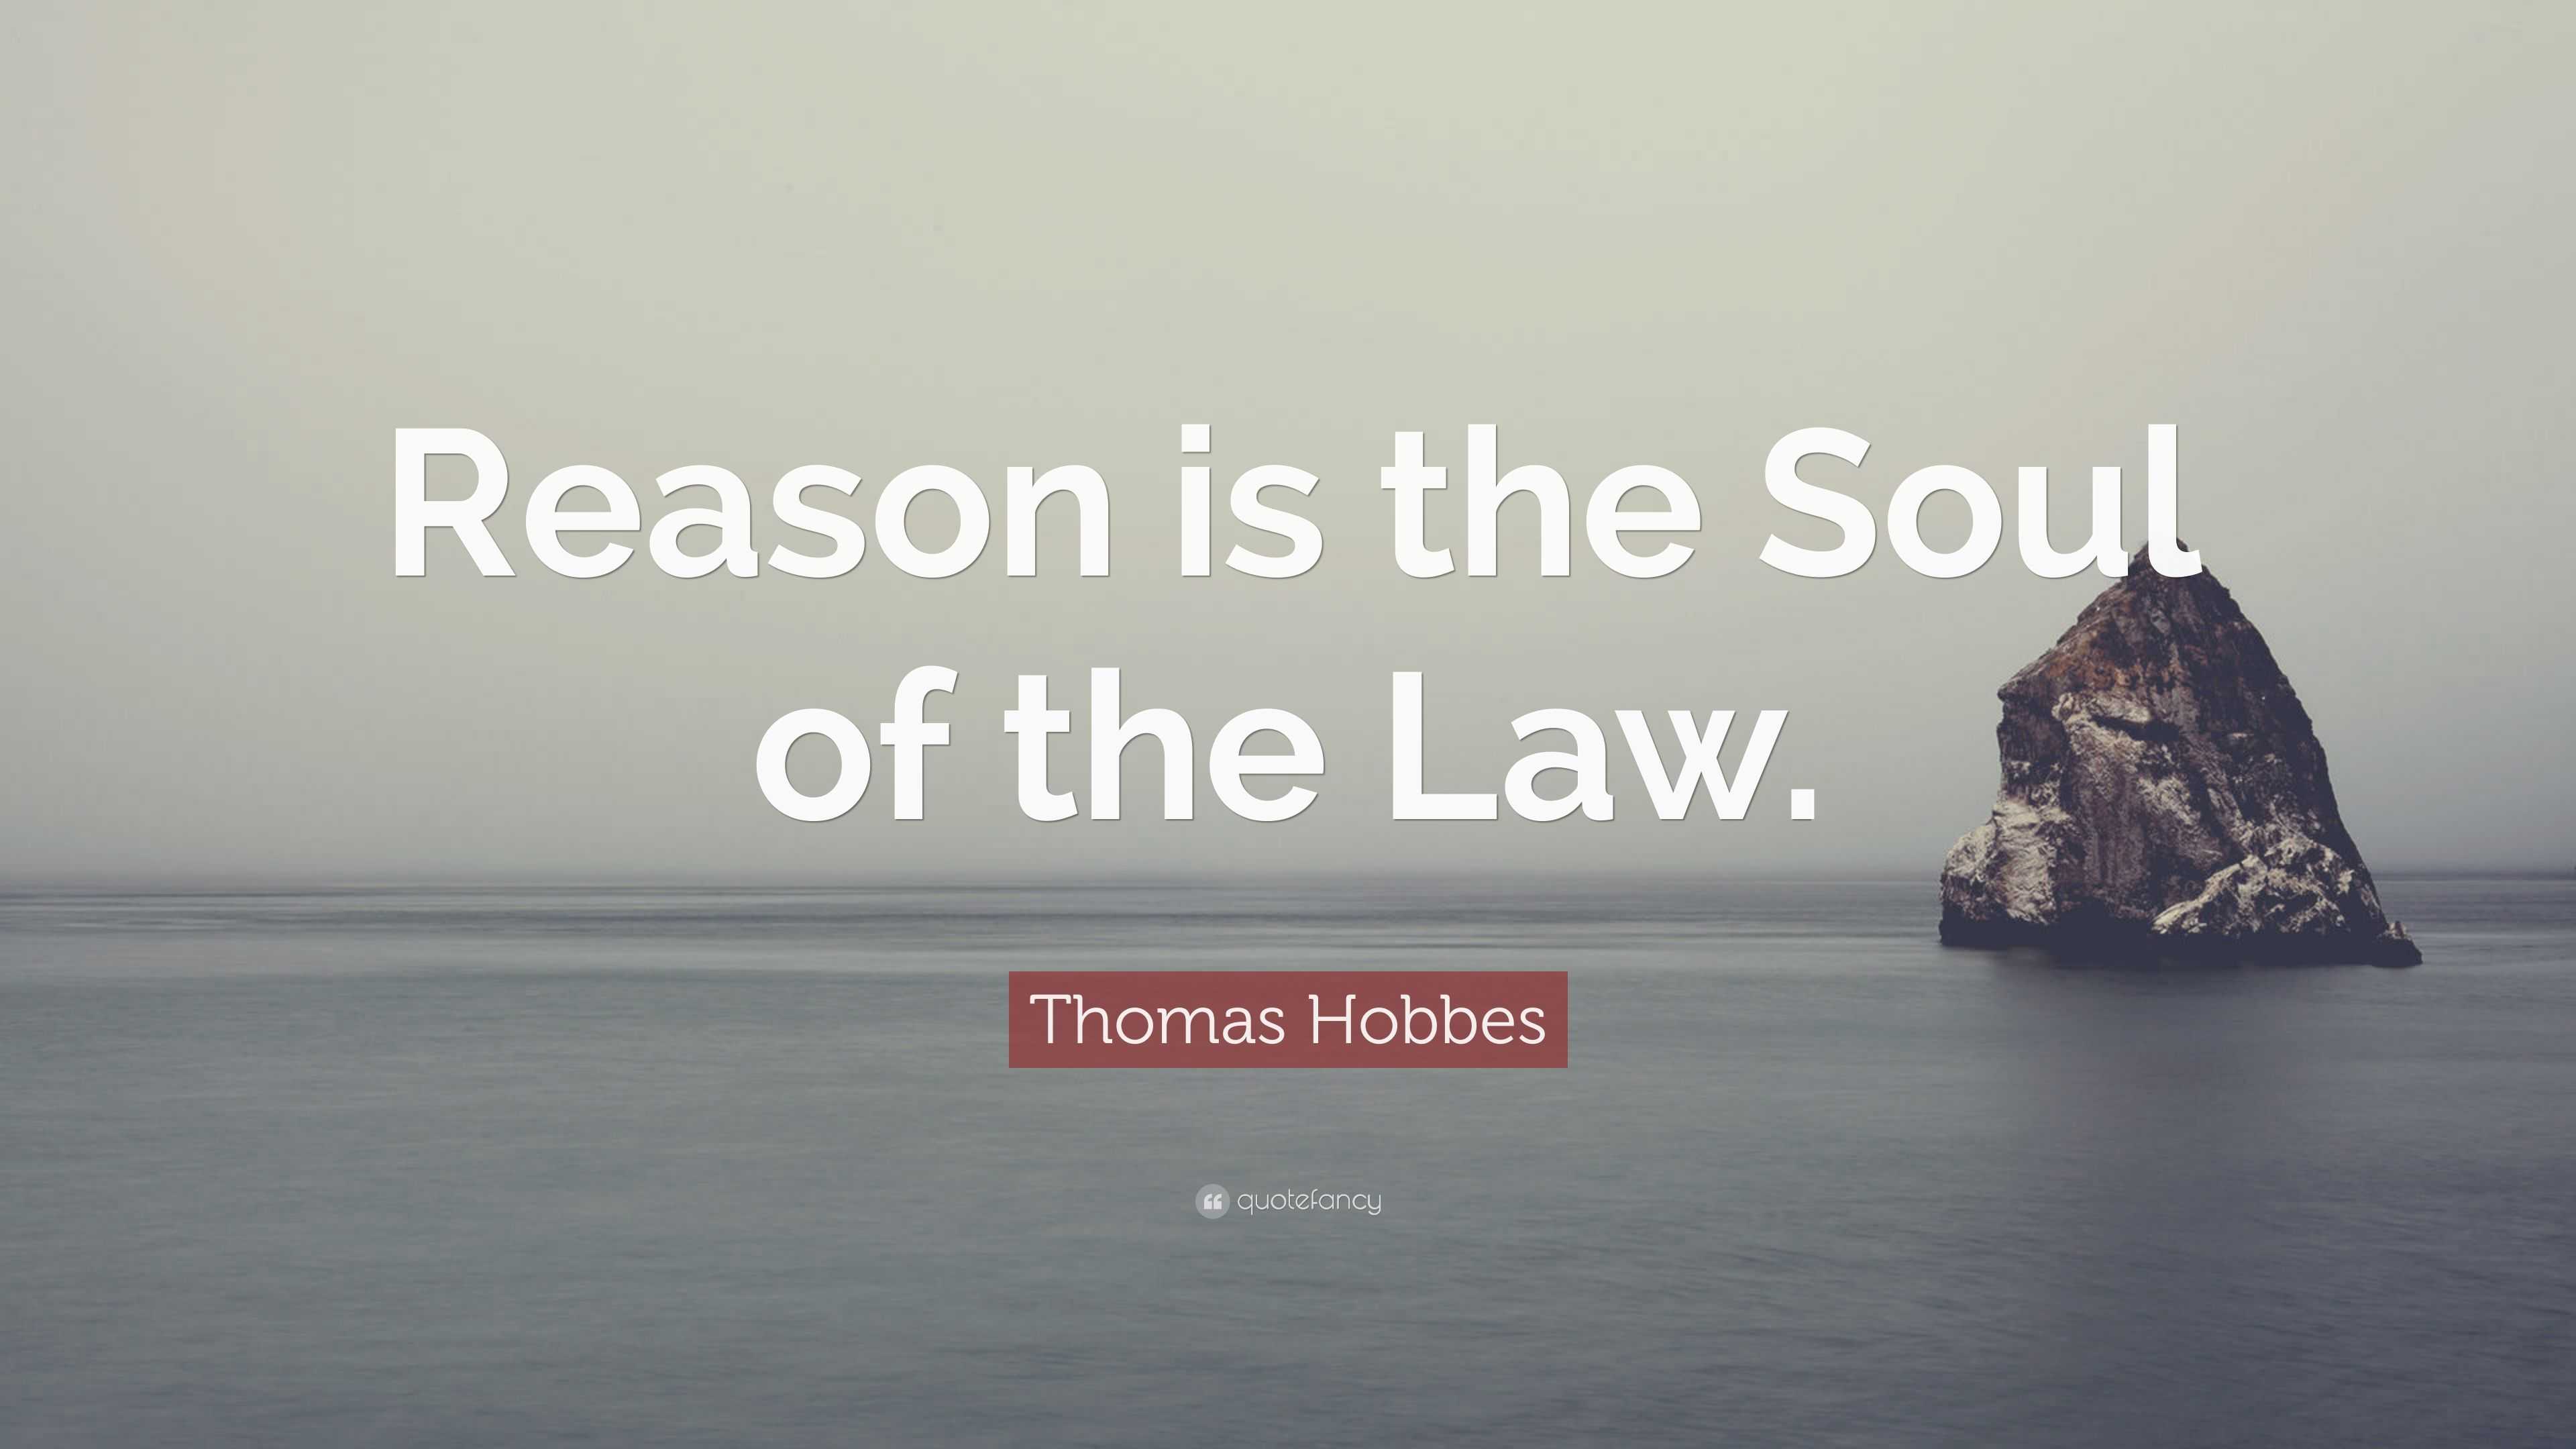 Thomas Hobbes Quote: “Reason is the Soul of the Law.”